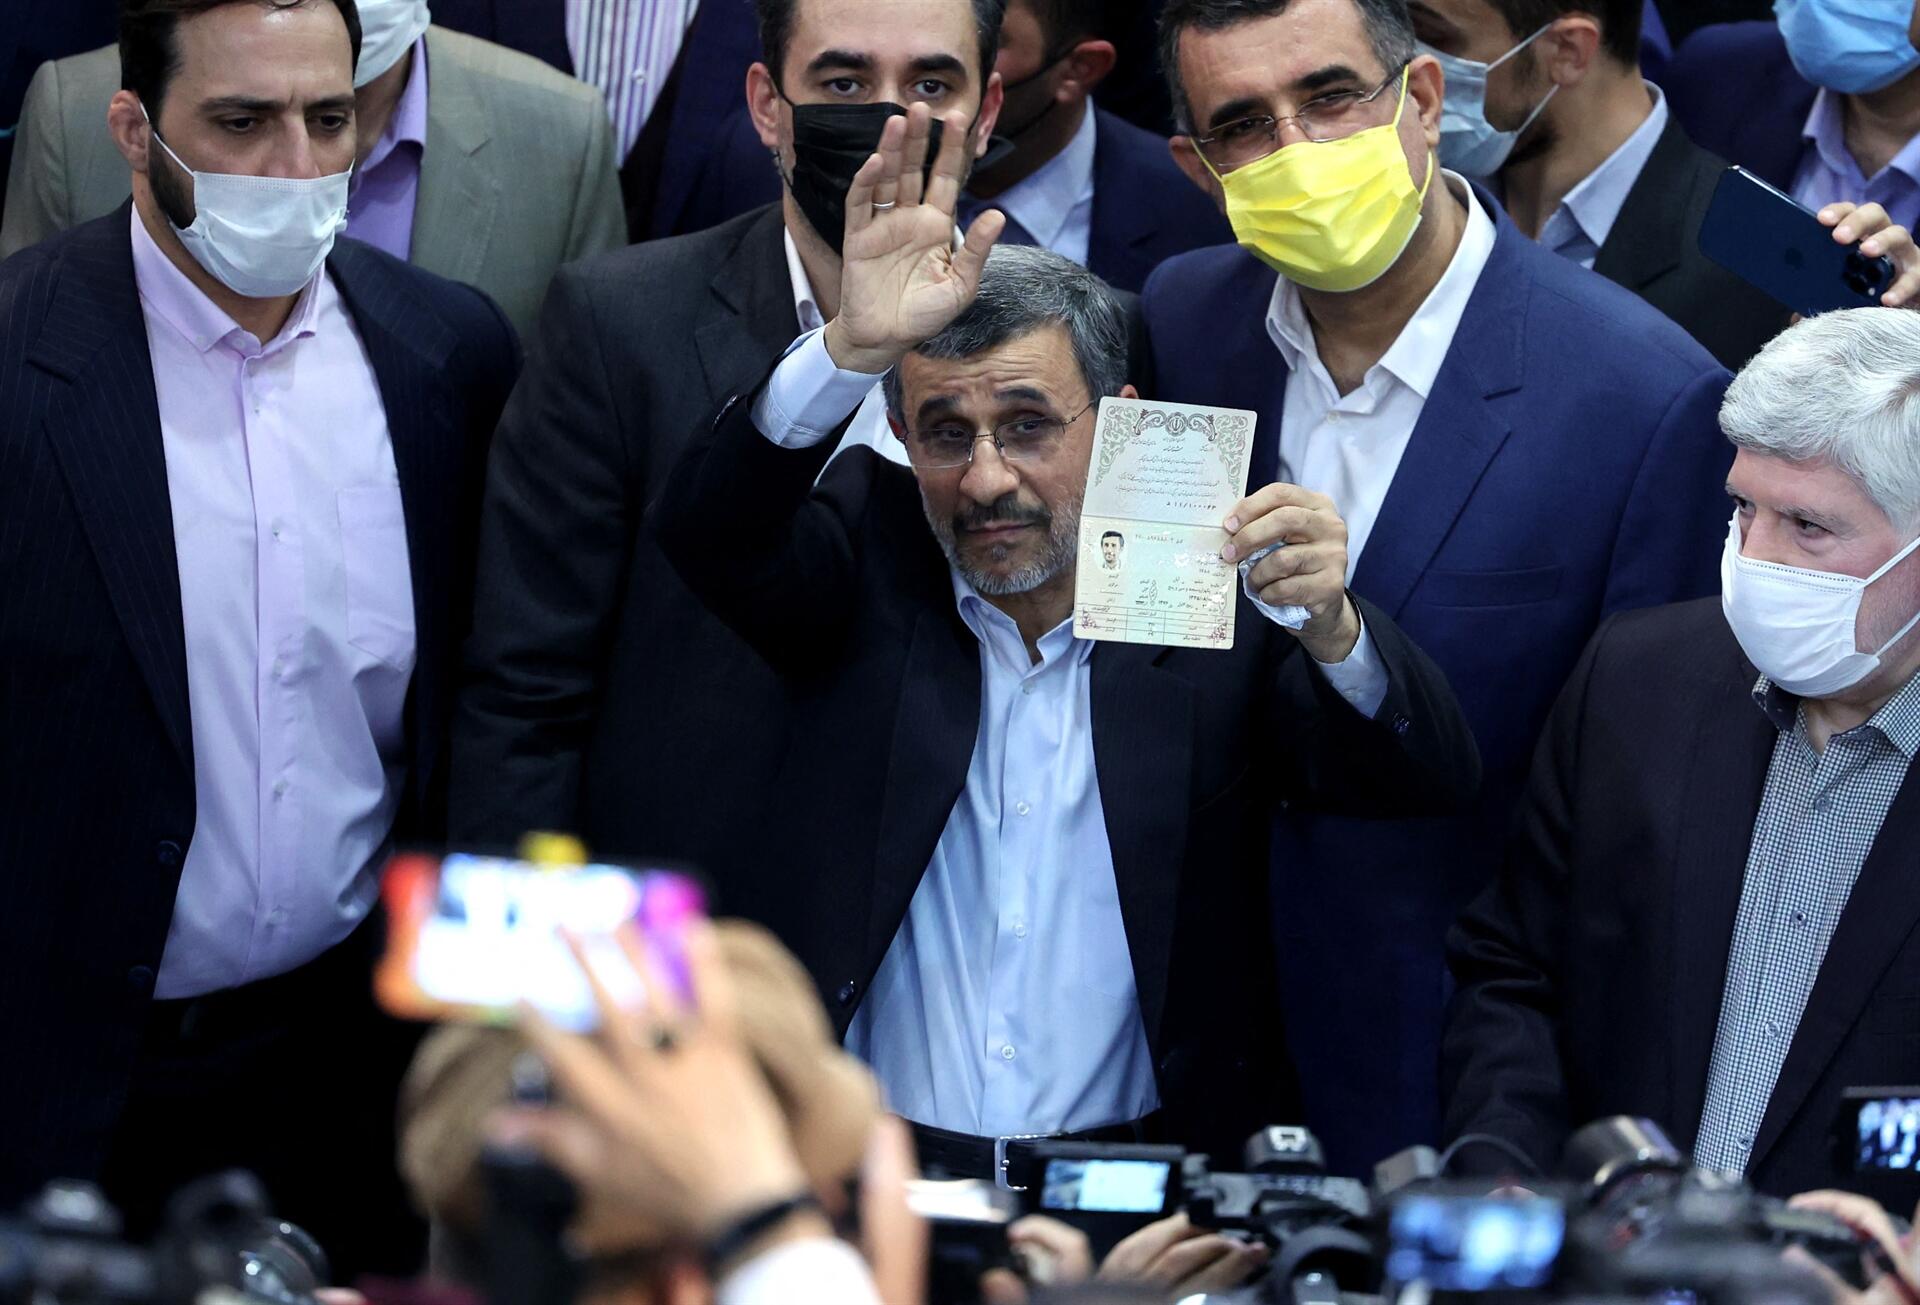 Ahmadinejad threatens boycotting Iran's upcoming elections if disqualified as a candidate